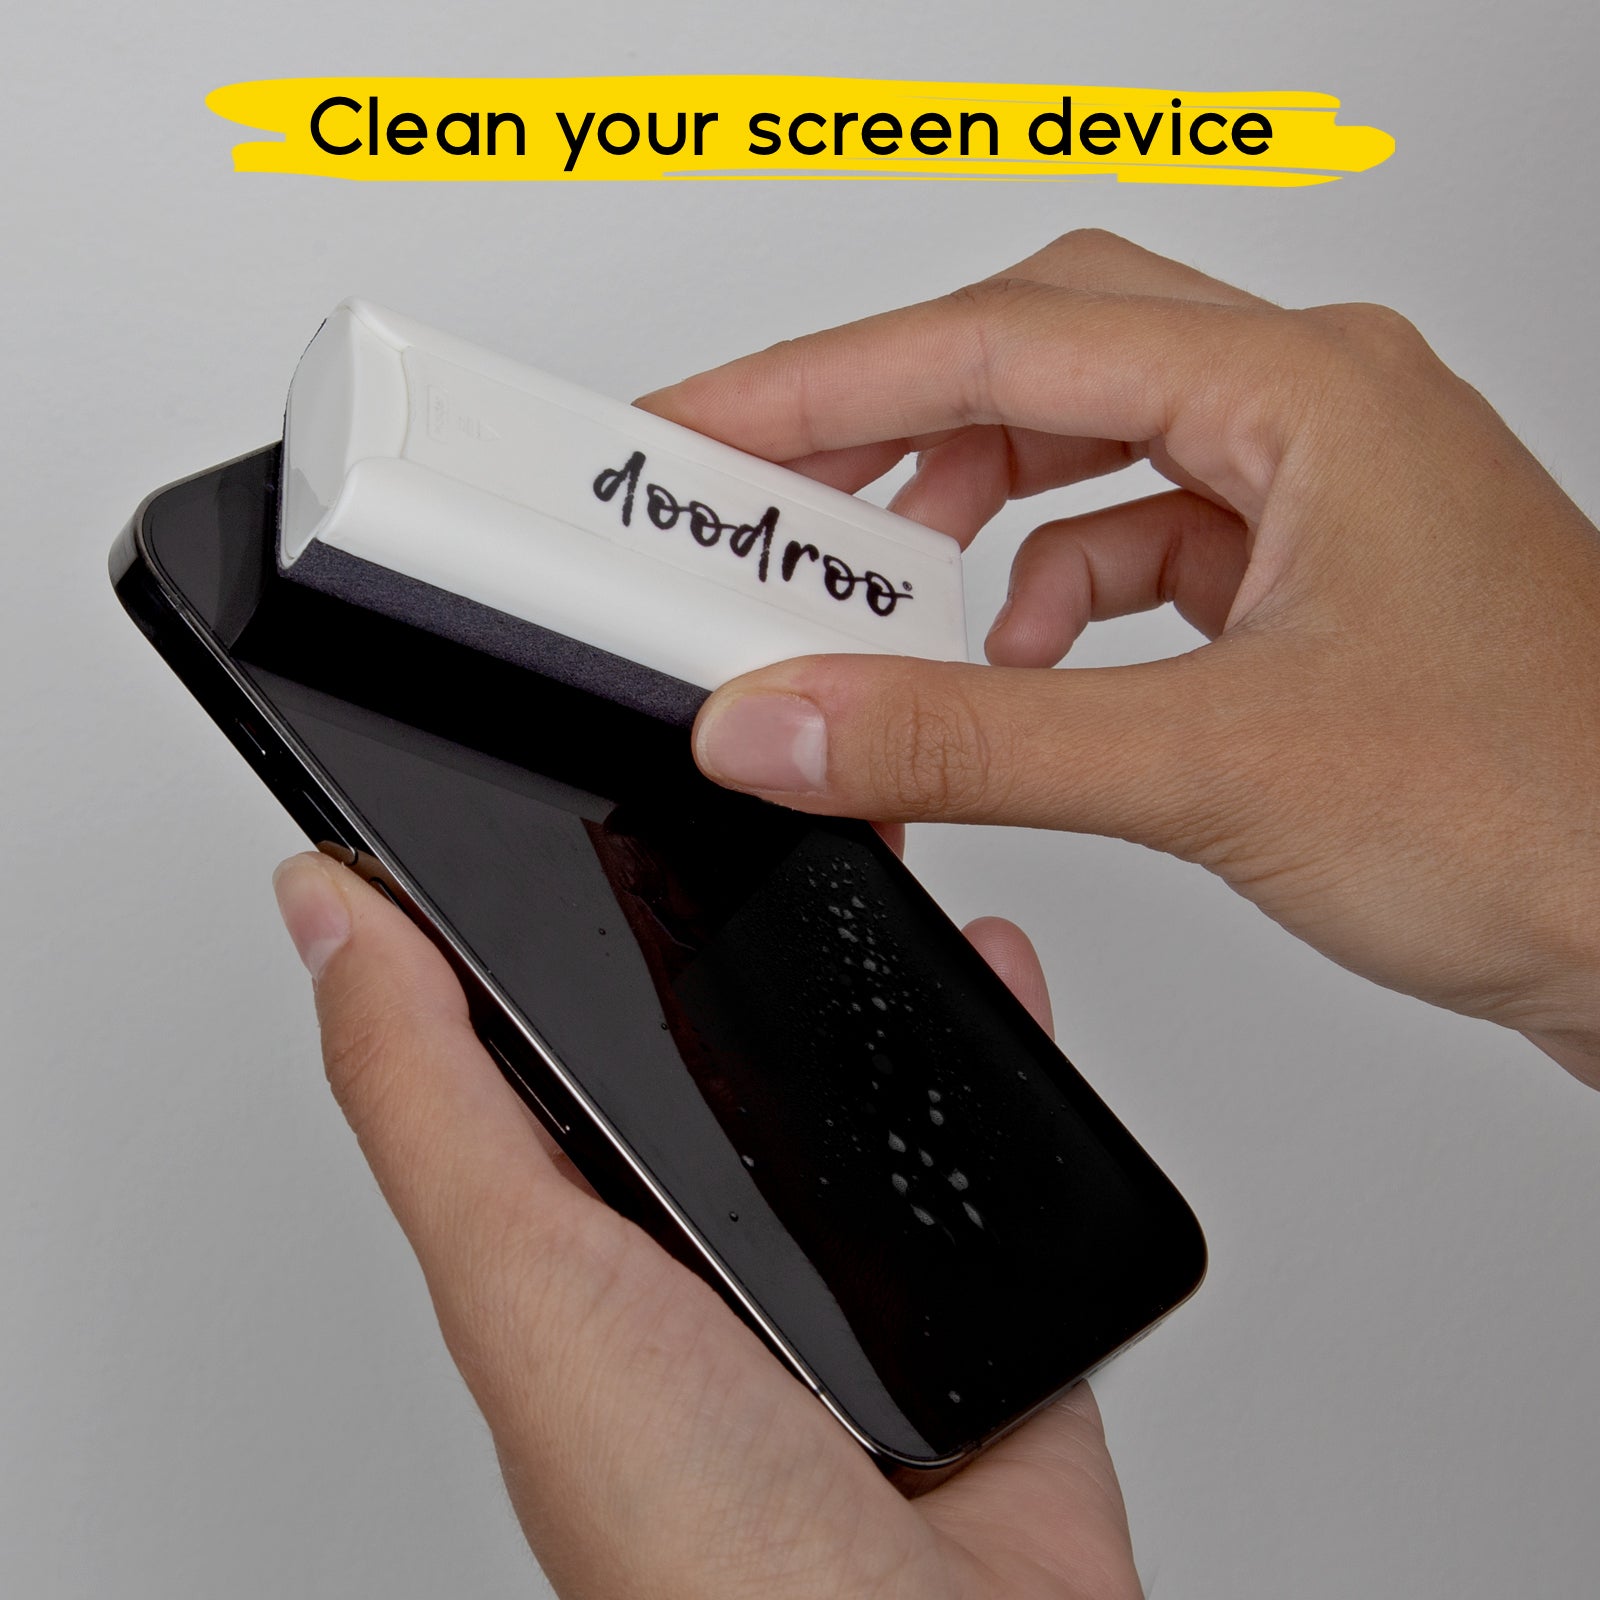 Cleaning kit for smartphone, tablet and PC displays